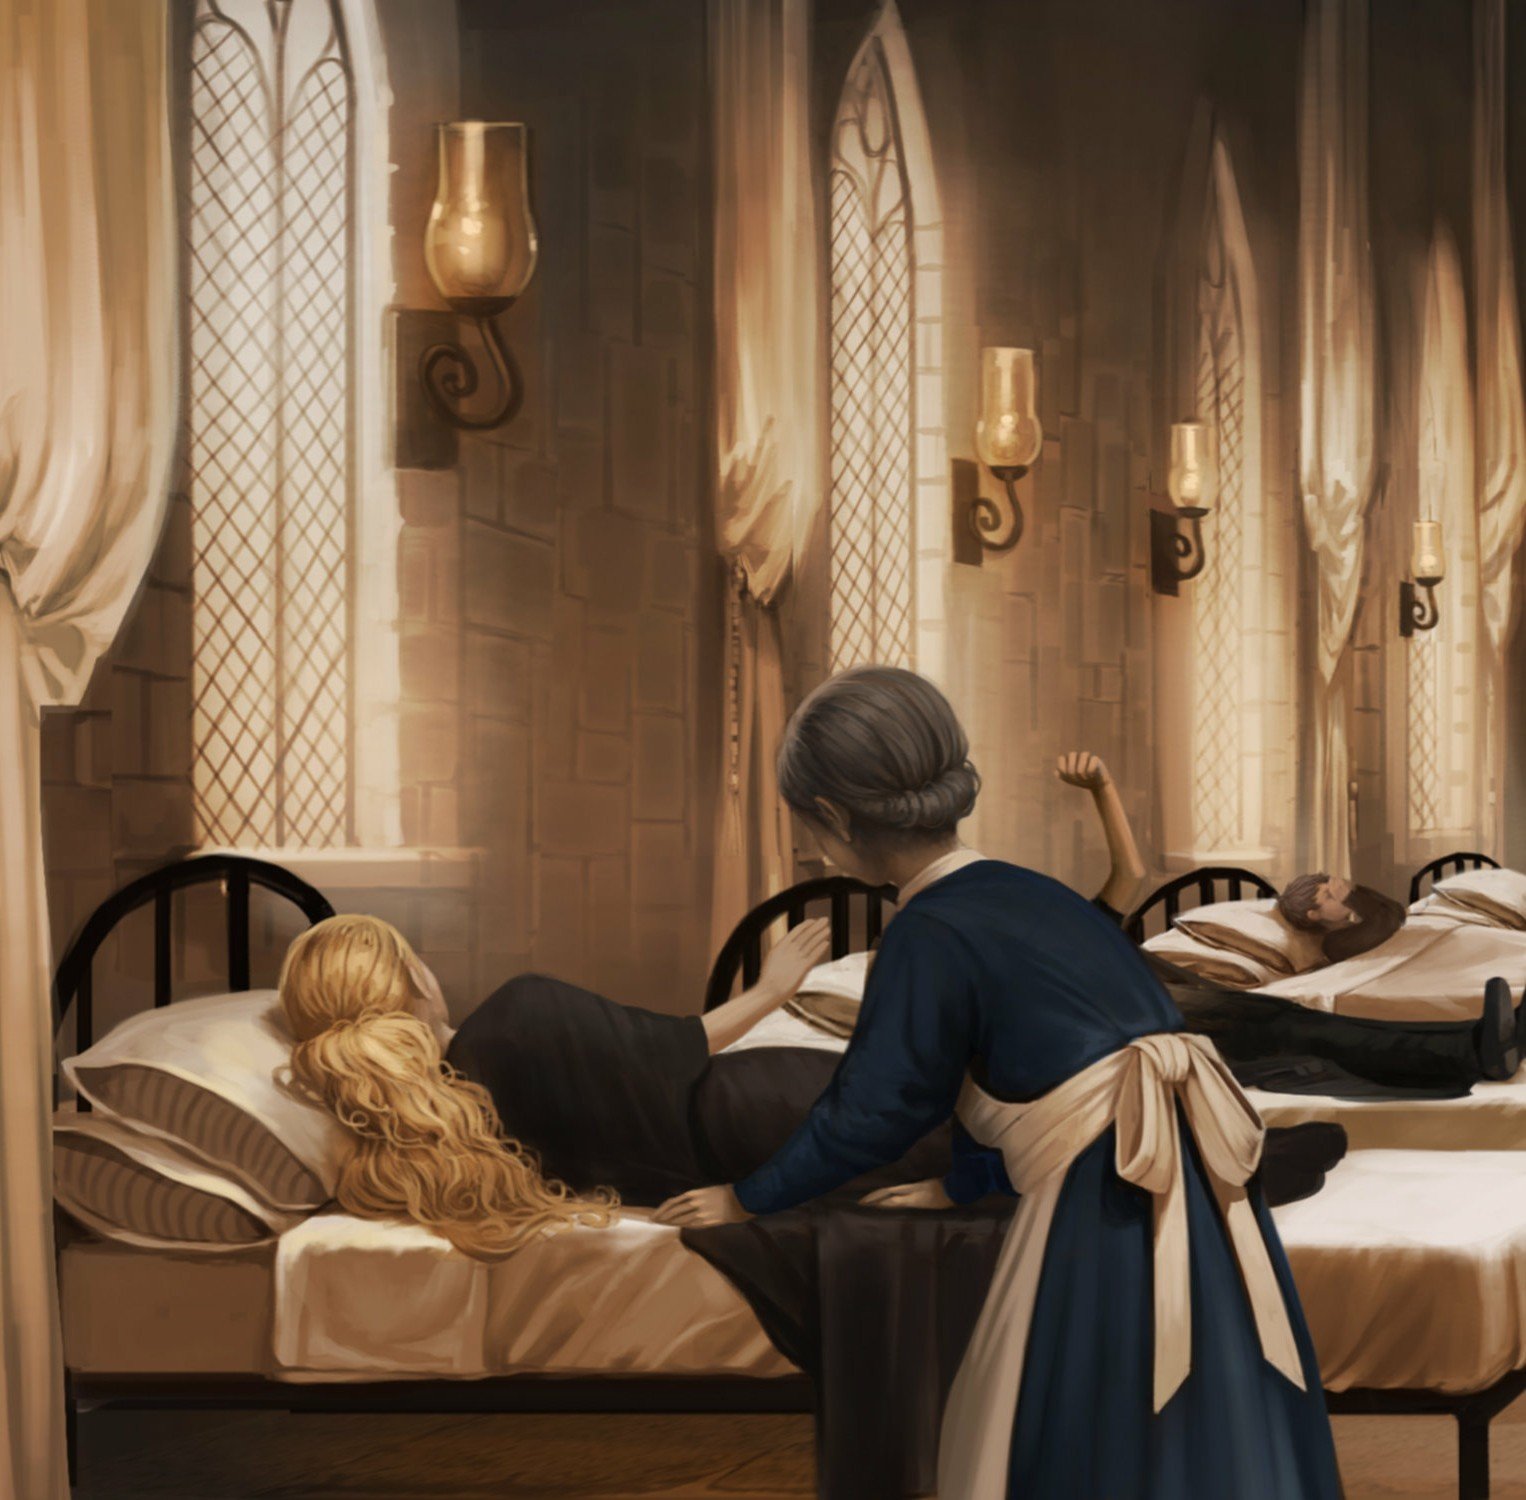 Hermione falls foul of the Basilisk: 3 students lay in the beds in the Nursing wing, the closest one is a blonde girl with her backk to us being tended to by the nurse; the middle one is unseen apart from their legs and raised hand; the last is a male with his right hand over his face